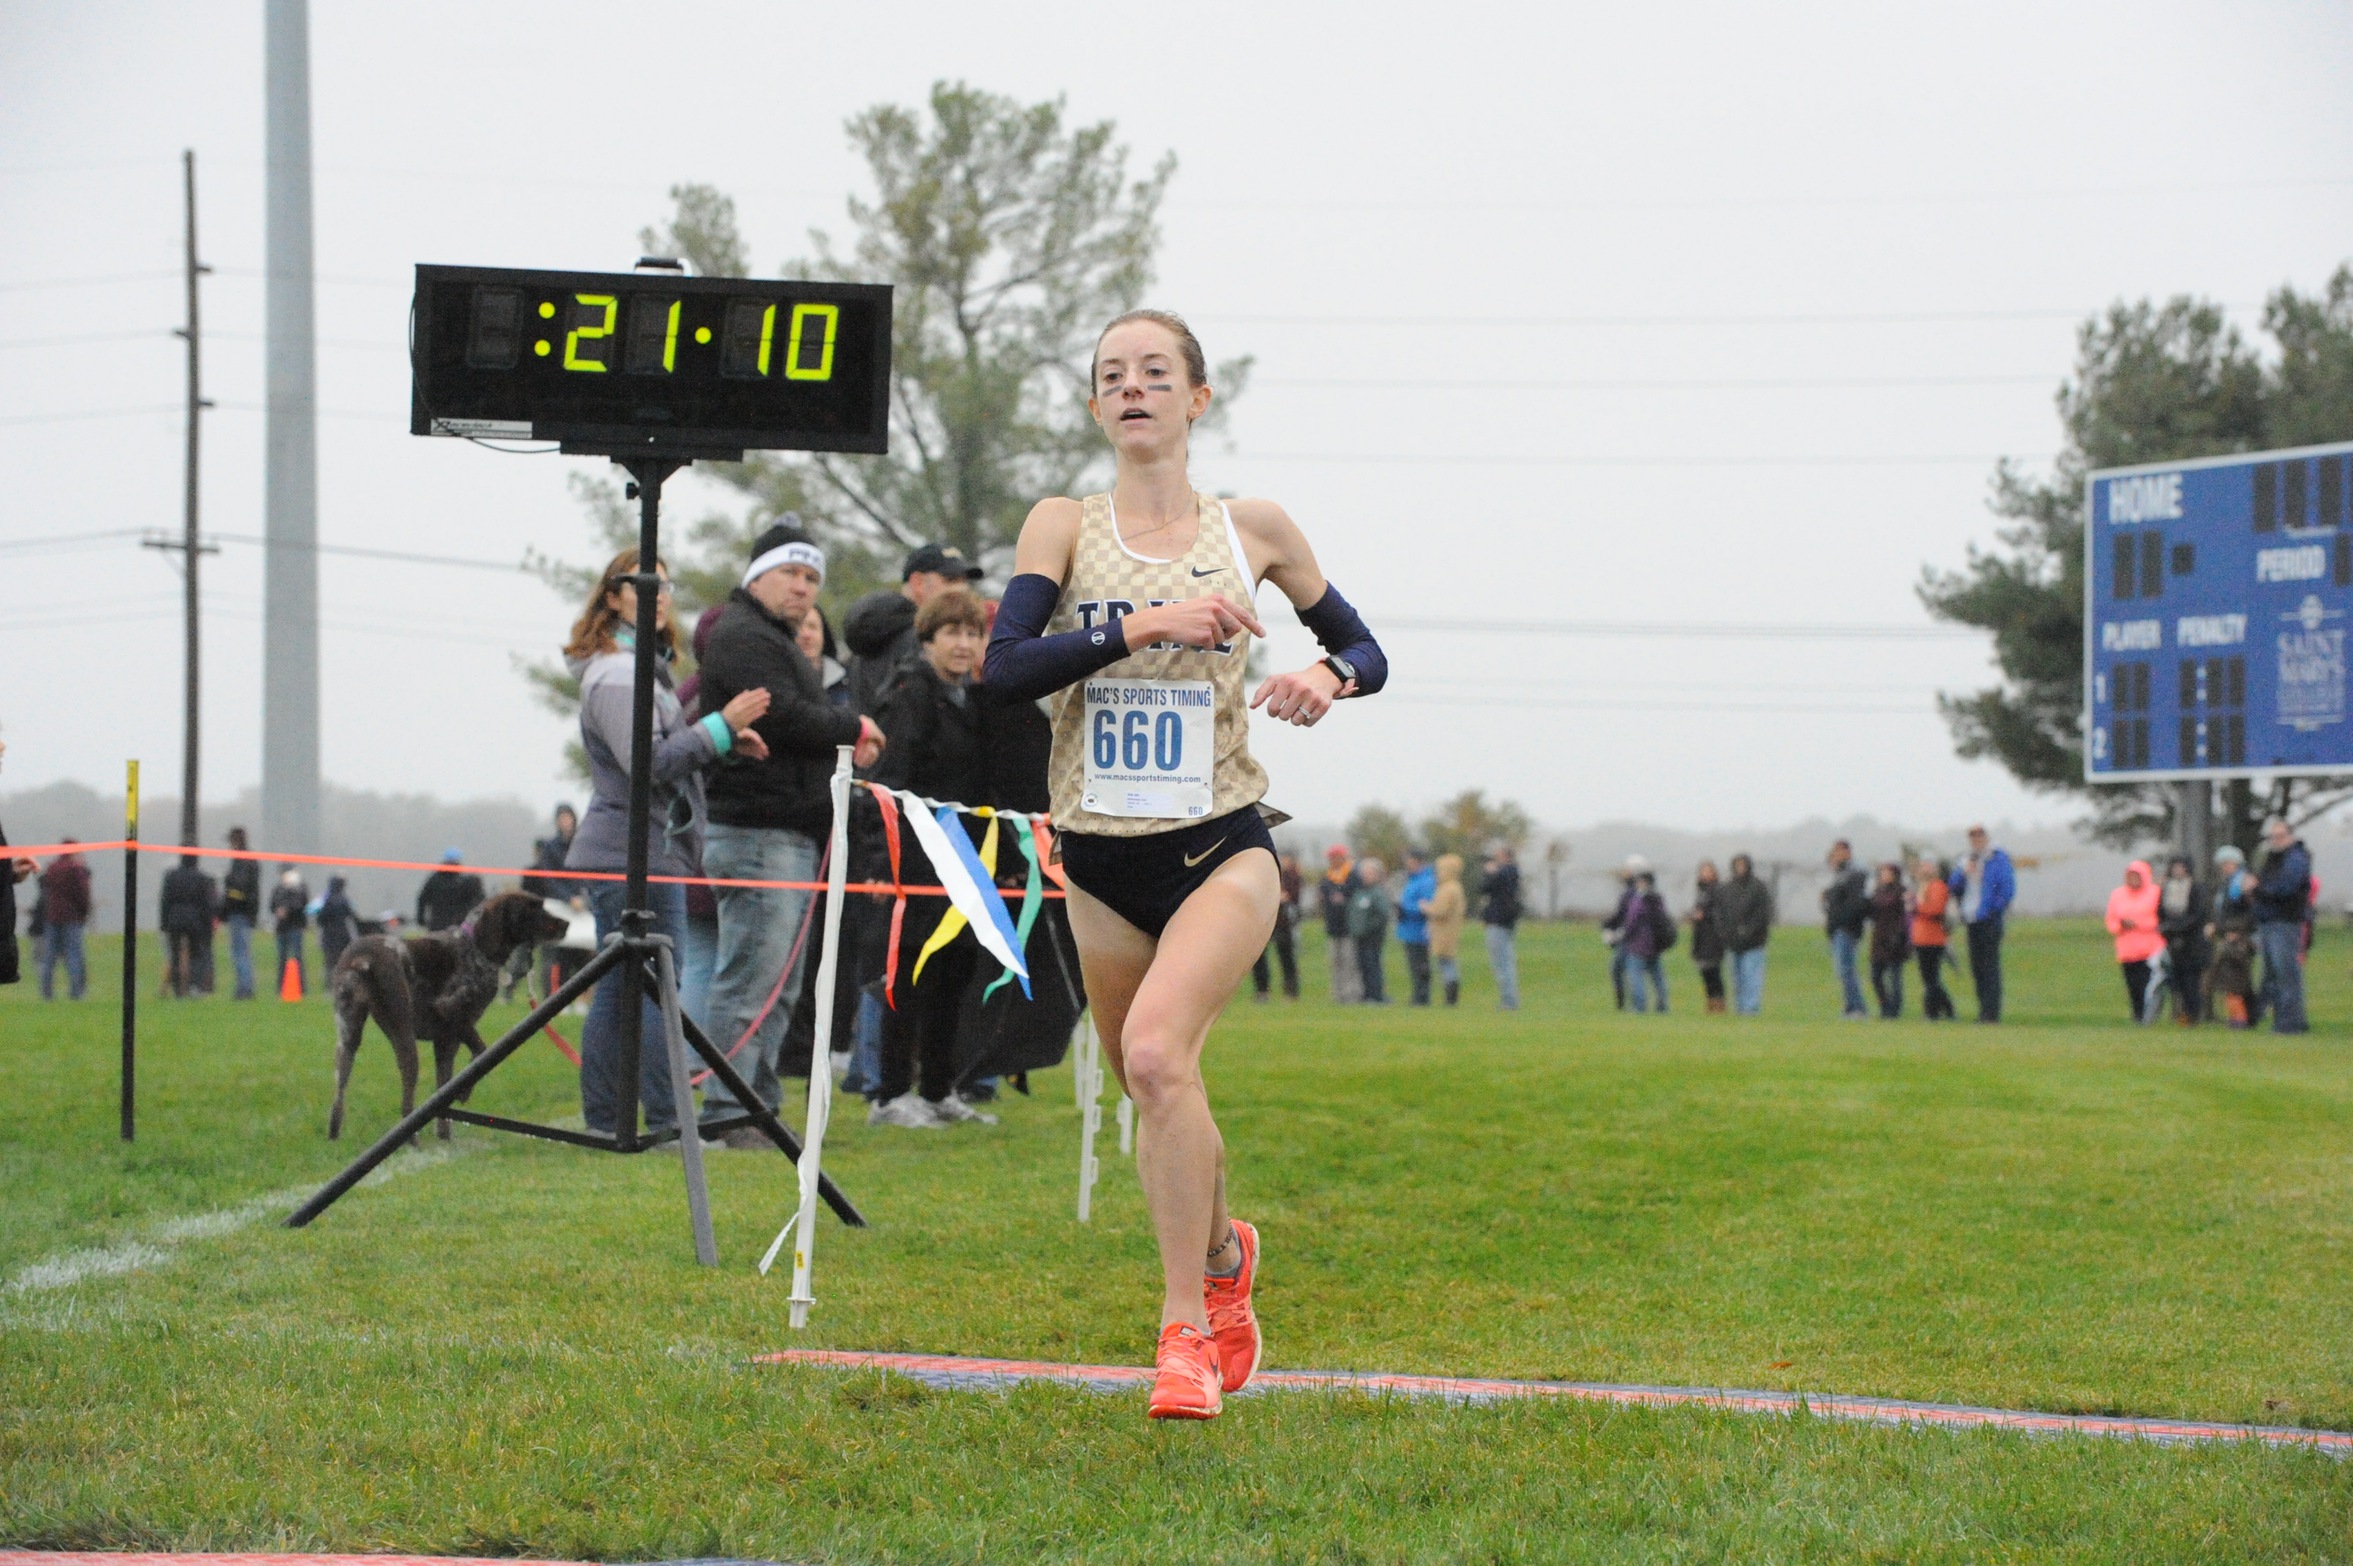 Bultemeyer Becomes Two-Time MVR and Leads Thunder to Third Place Team Finish at MIAA Championships